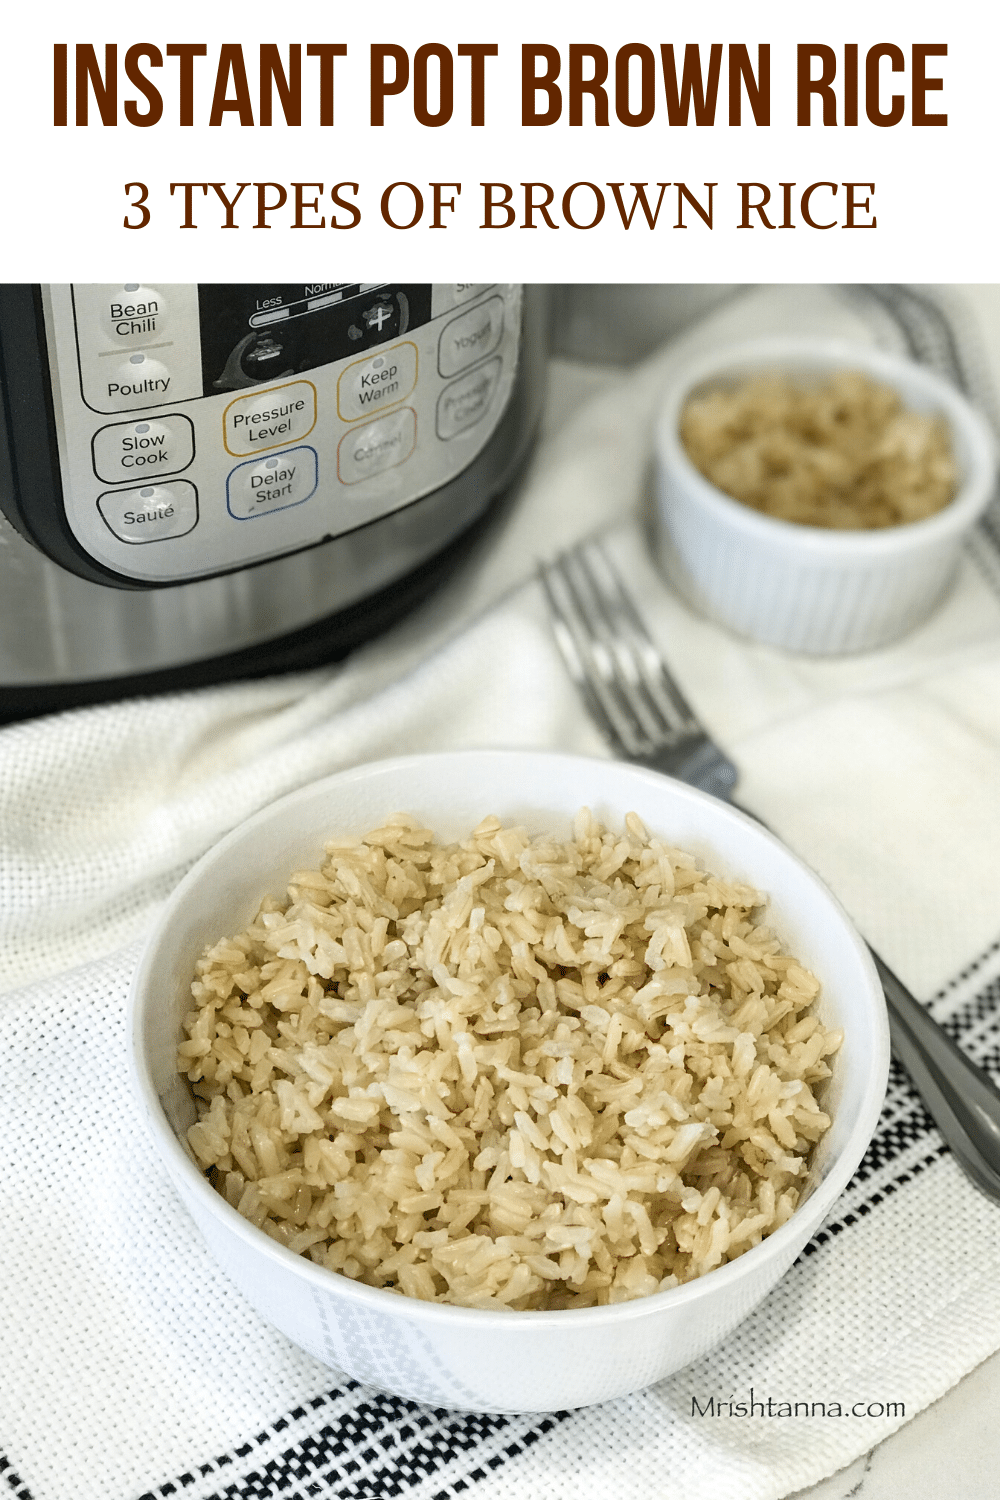 A bowl of rice on a plate, with Brown rice and Basmati